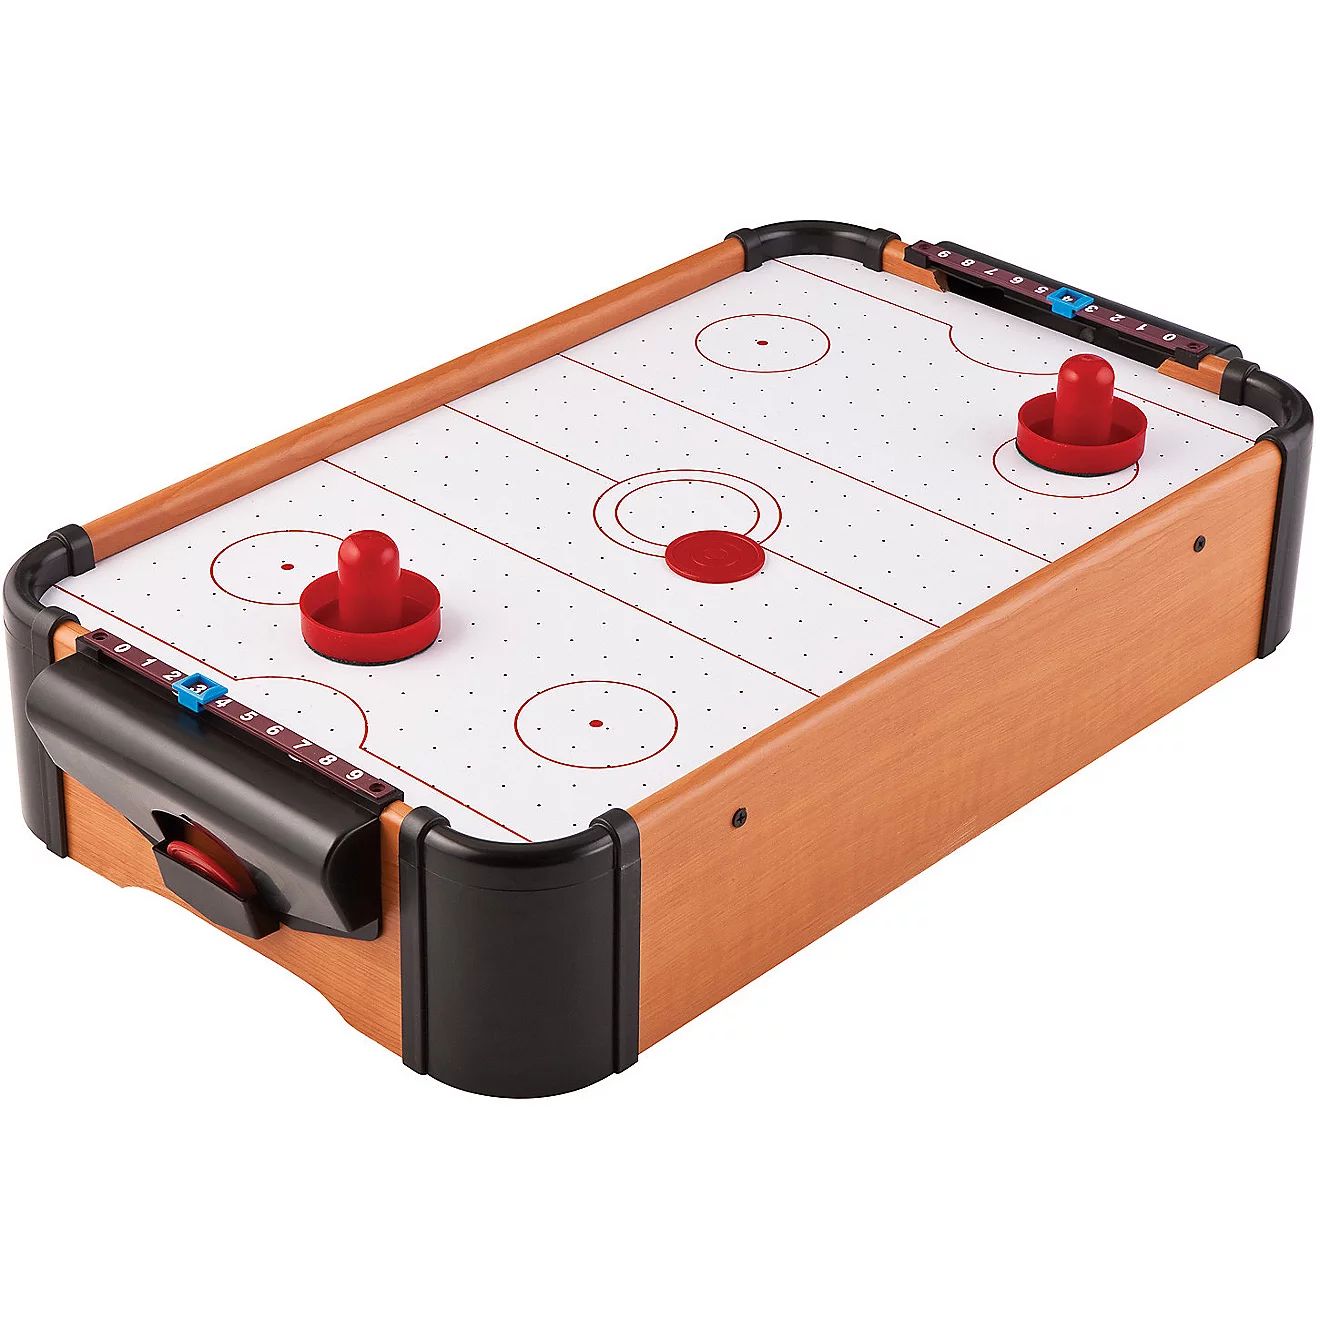 Mainstreet Classics Sinister Table Top Air Powered Hockey | Academy Sports + Outdoors